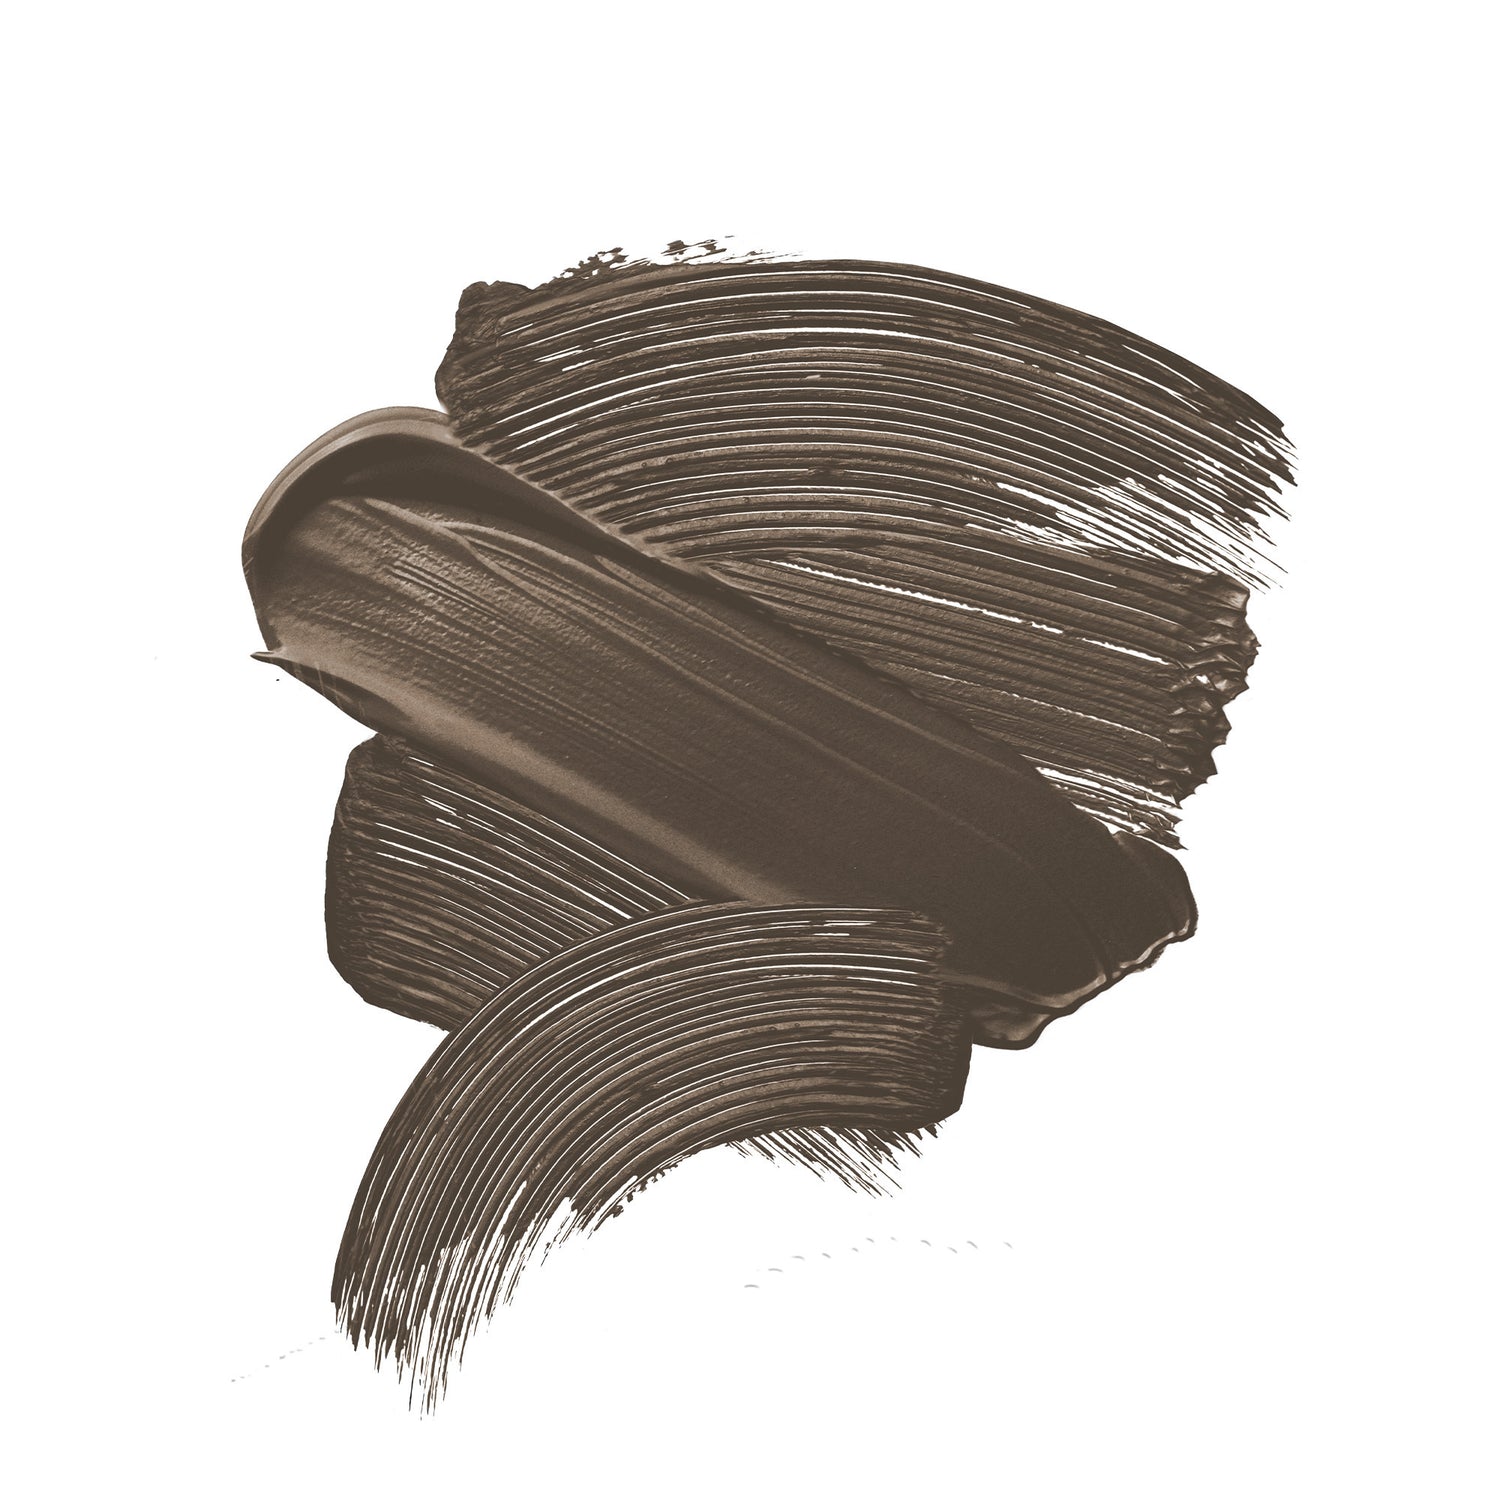 Swatch of Tinted Multi-Peptide Brow Gel - Color-Taupe against a white background